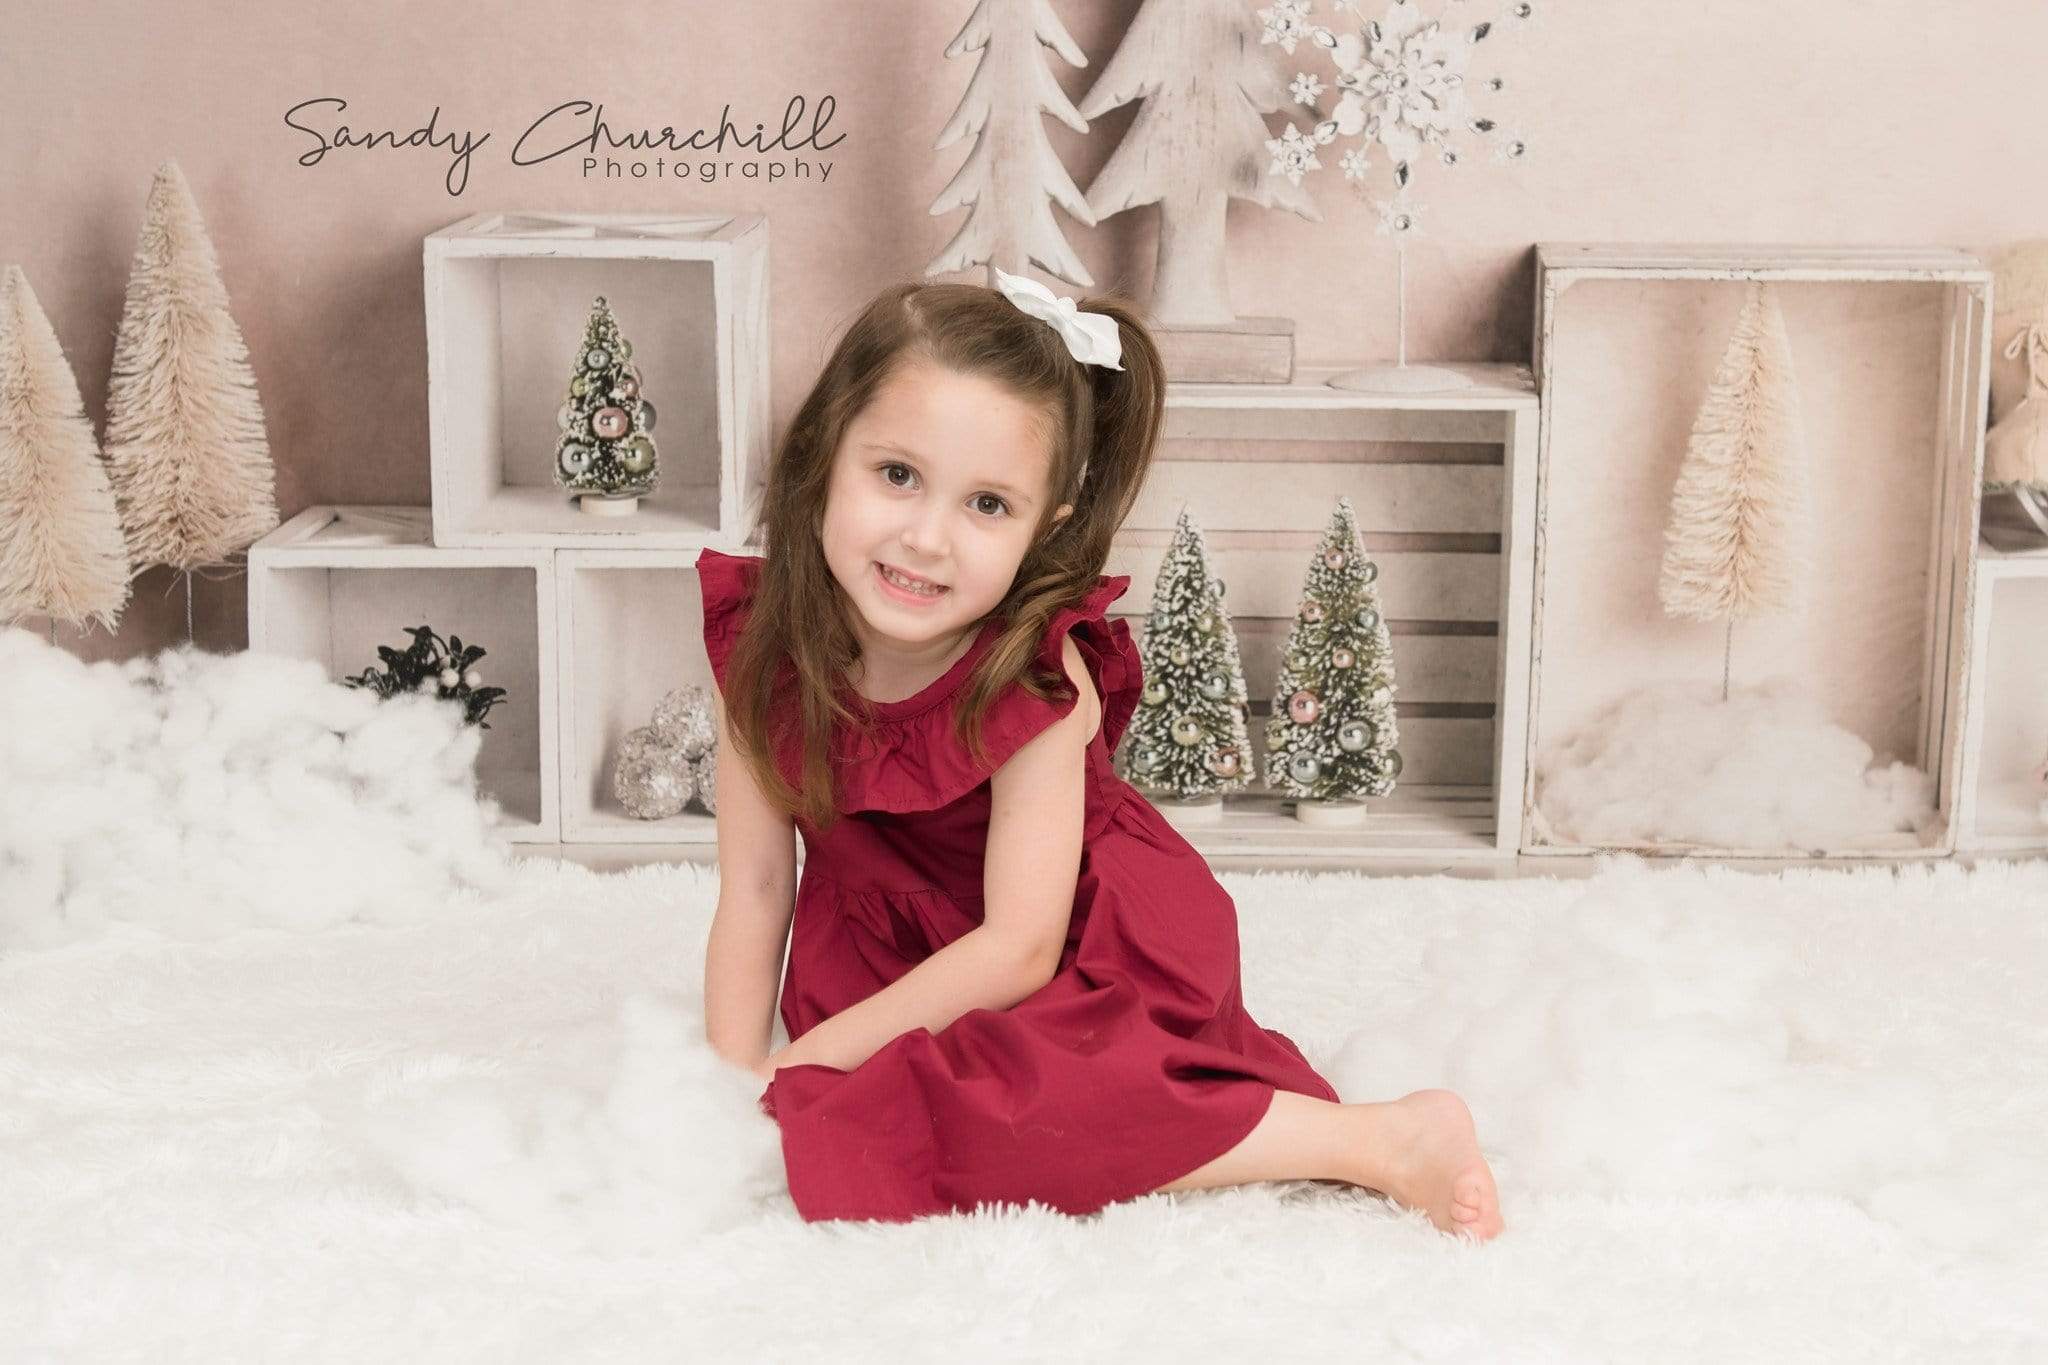 Kate Elegant Christmas Winter Display Backdrop for Photography Designed By Mandy Ringe Photography